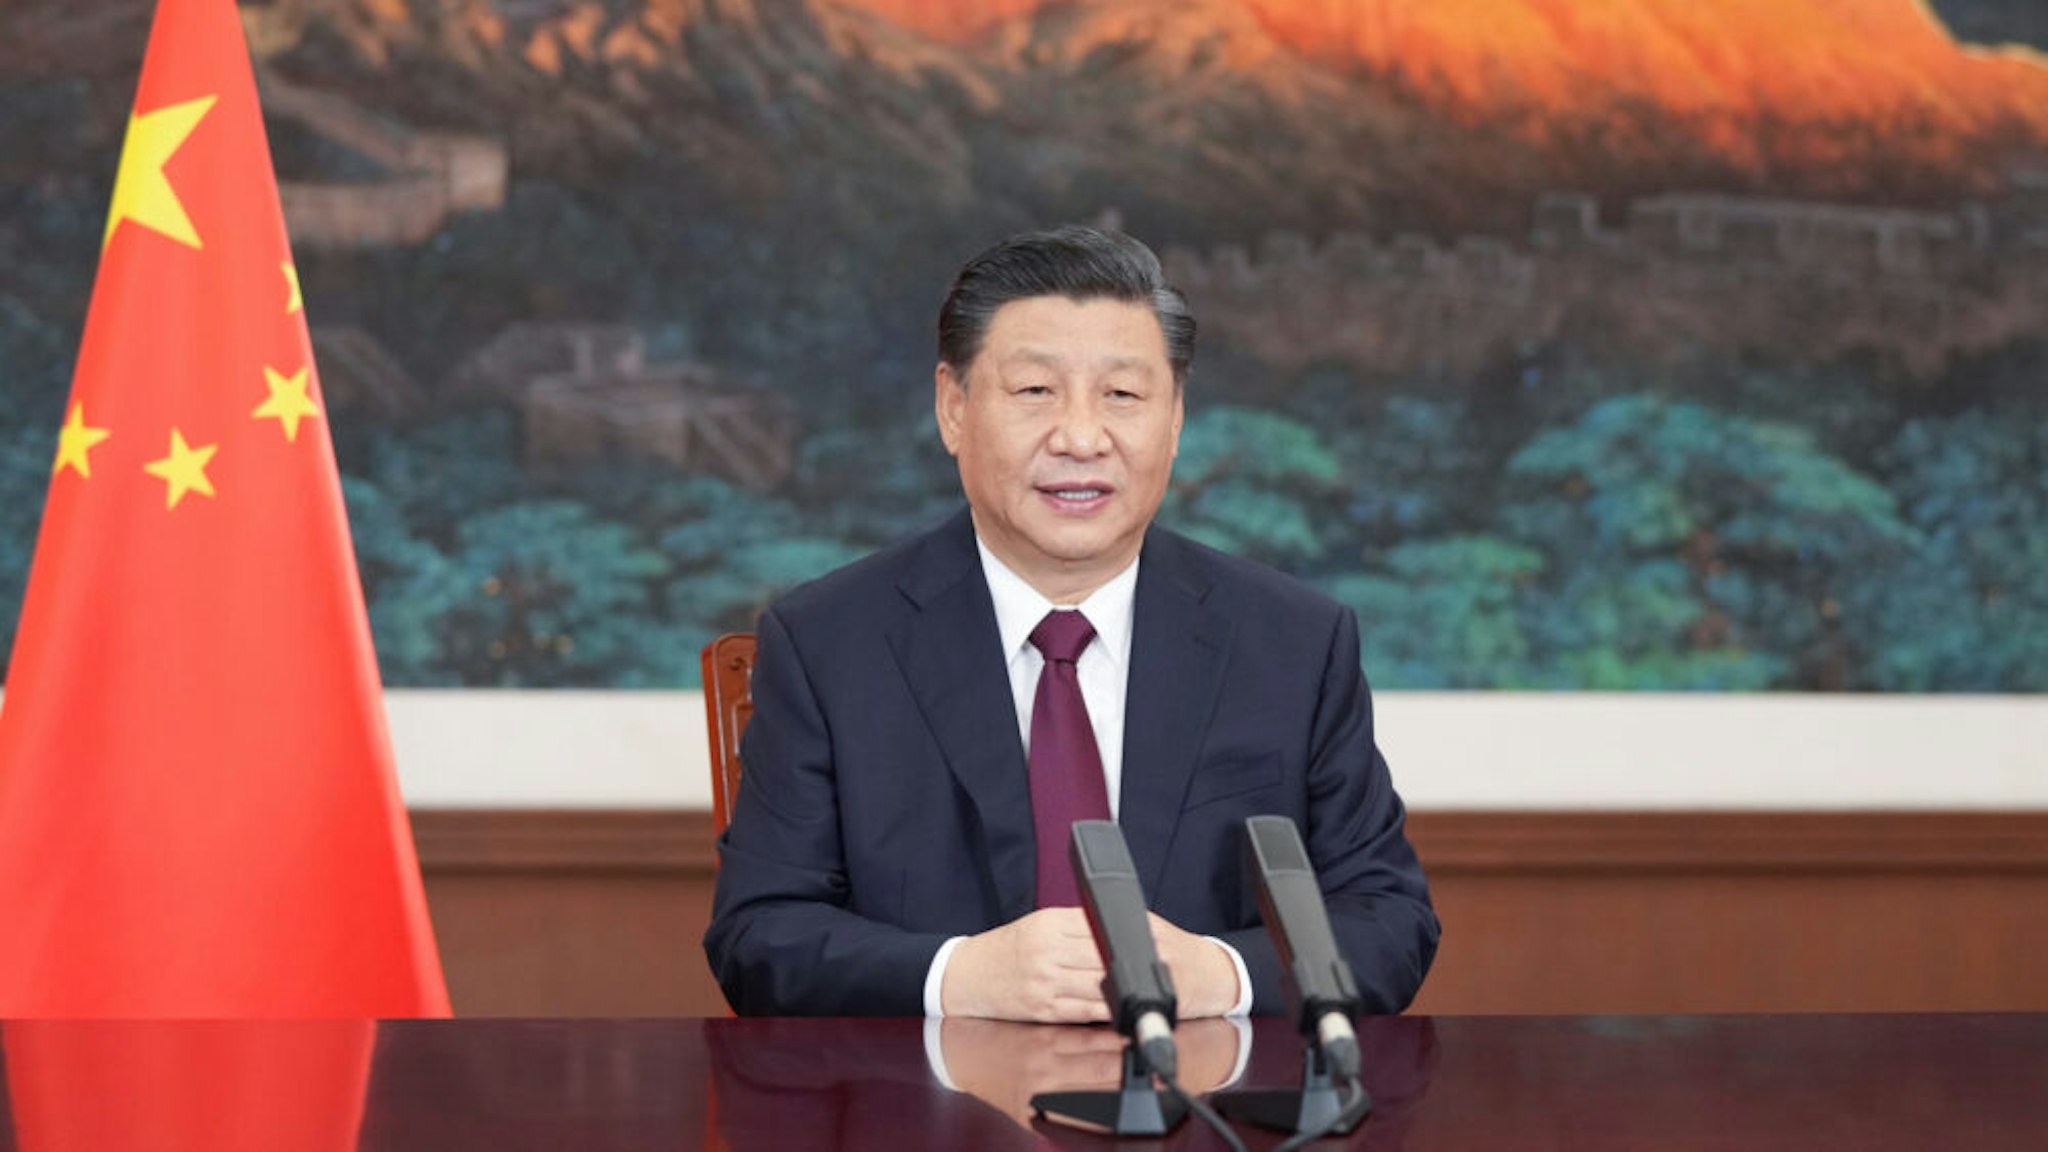 BEIJING, March 17, 2021 -- Chinese President Xi Jinping sends a video message to an event held by Bangladesh in commemoration of the centenary of its founding father Sheikh Mujibur Rahman's birth, also in celebration of the 50th anniversary of the country's independence on March 17, 2021. On behalf of the Chinese government and Chinese people, Xi extended sincere greetings and best wishes to Bangladeshi President Abdul Hamid, Bangladeshi Prime Minister Sheikh Hasina, and the Bangladeshi government and people.